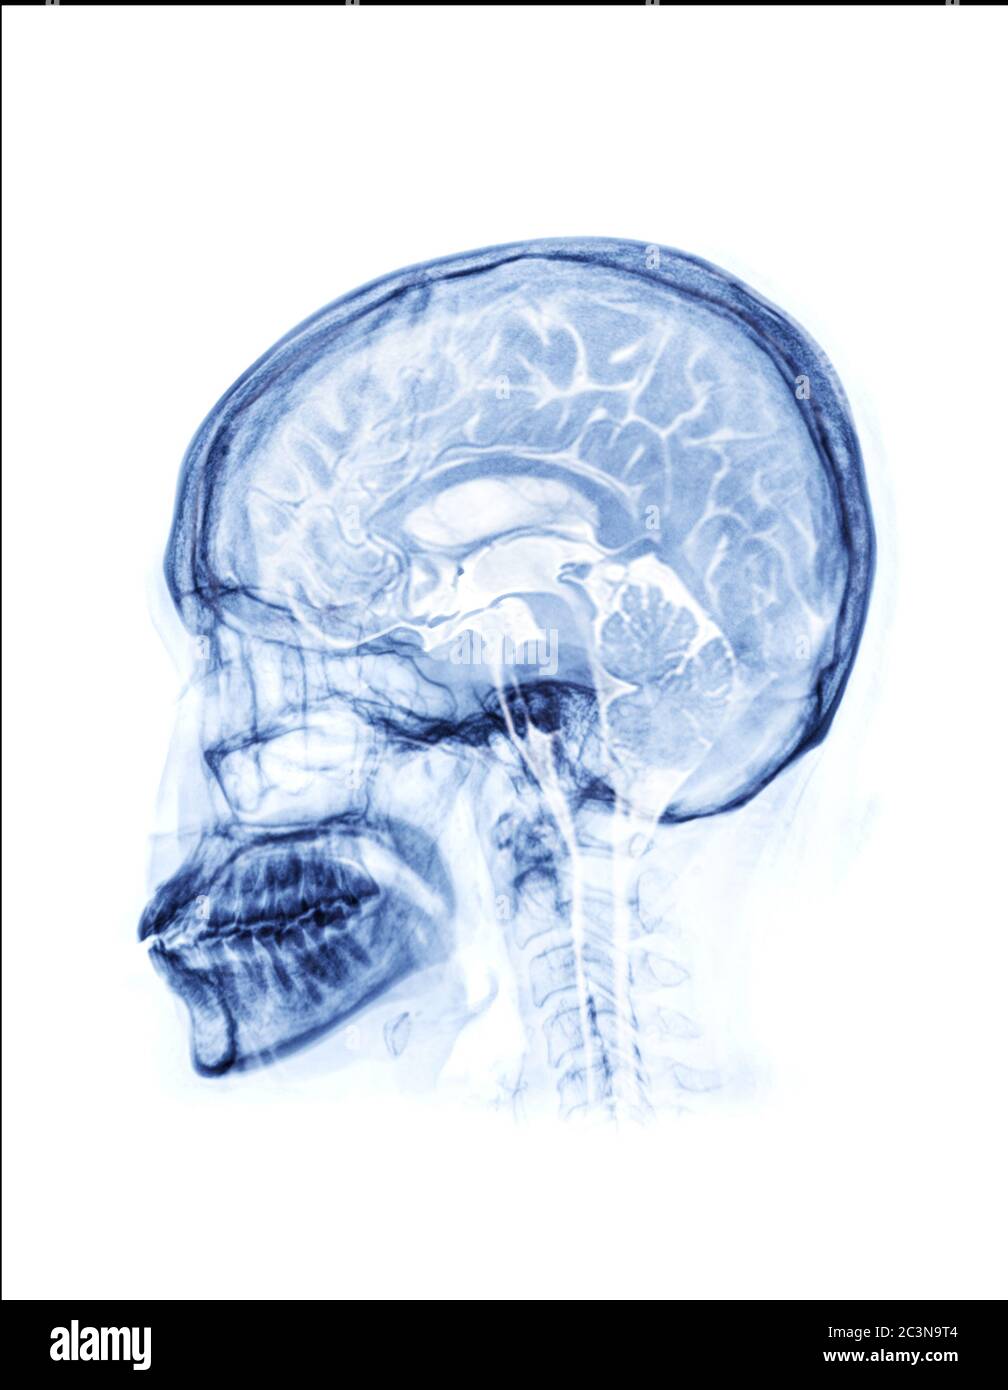 Skull x-ray lateral view with merge MRI brain sagittal view for medical background concept. Stock Photo